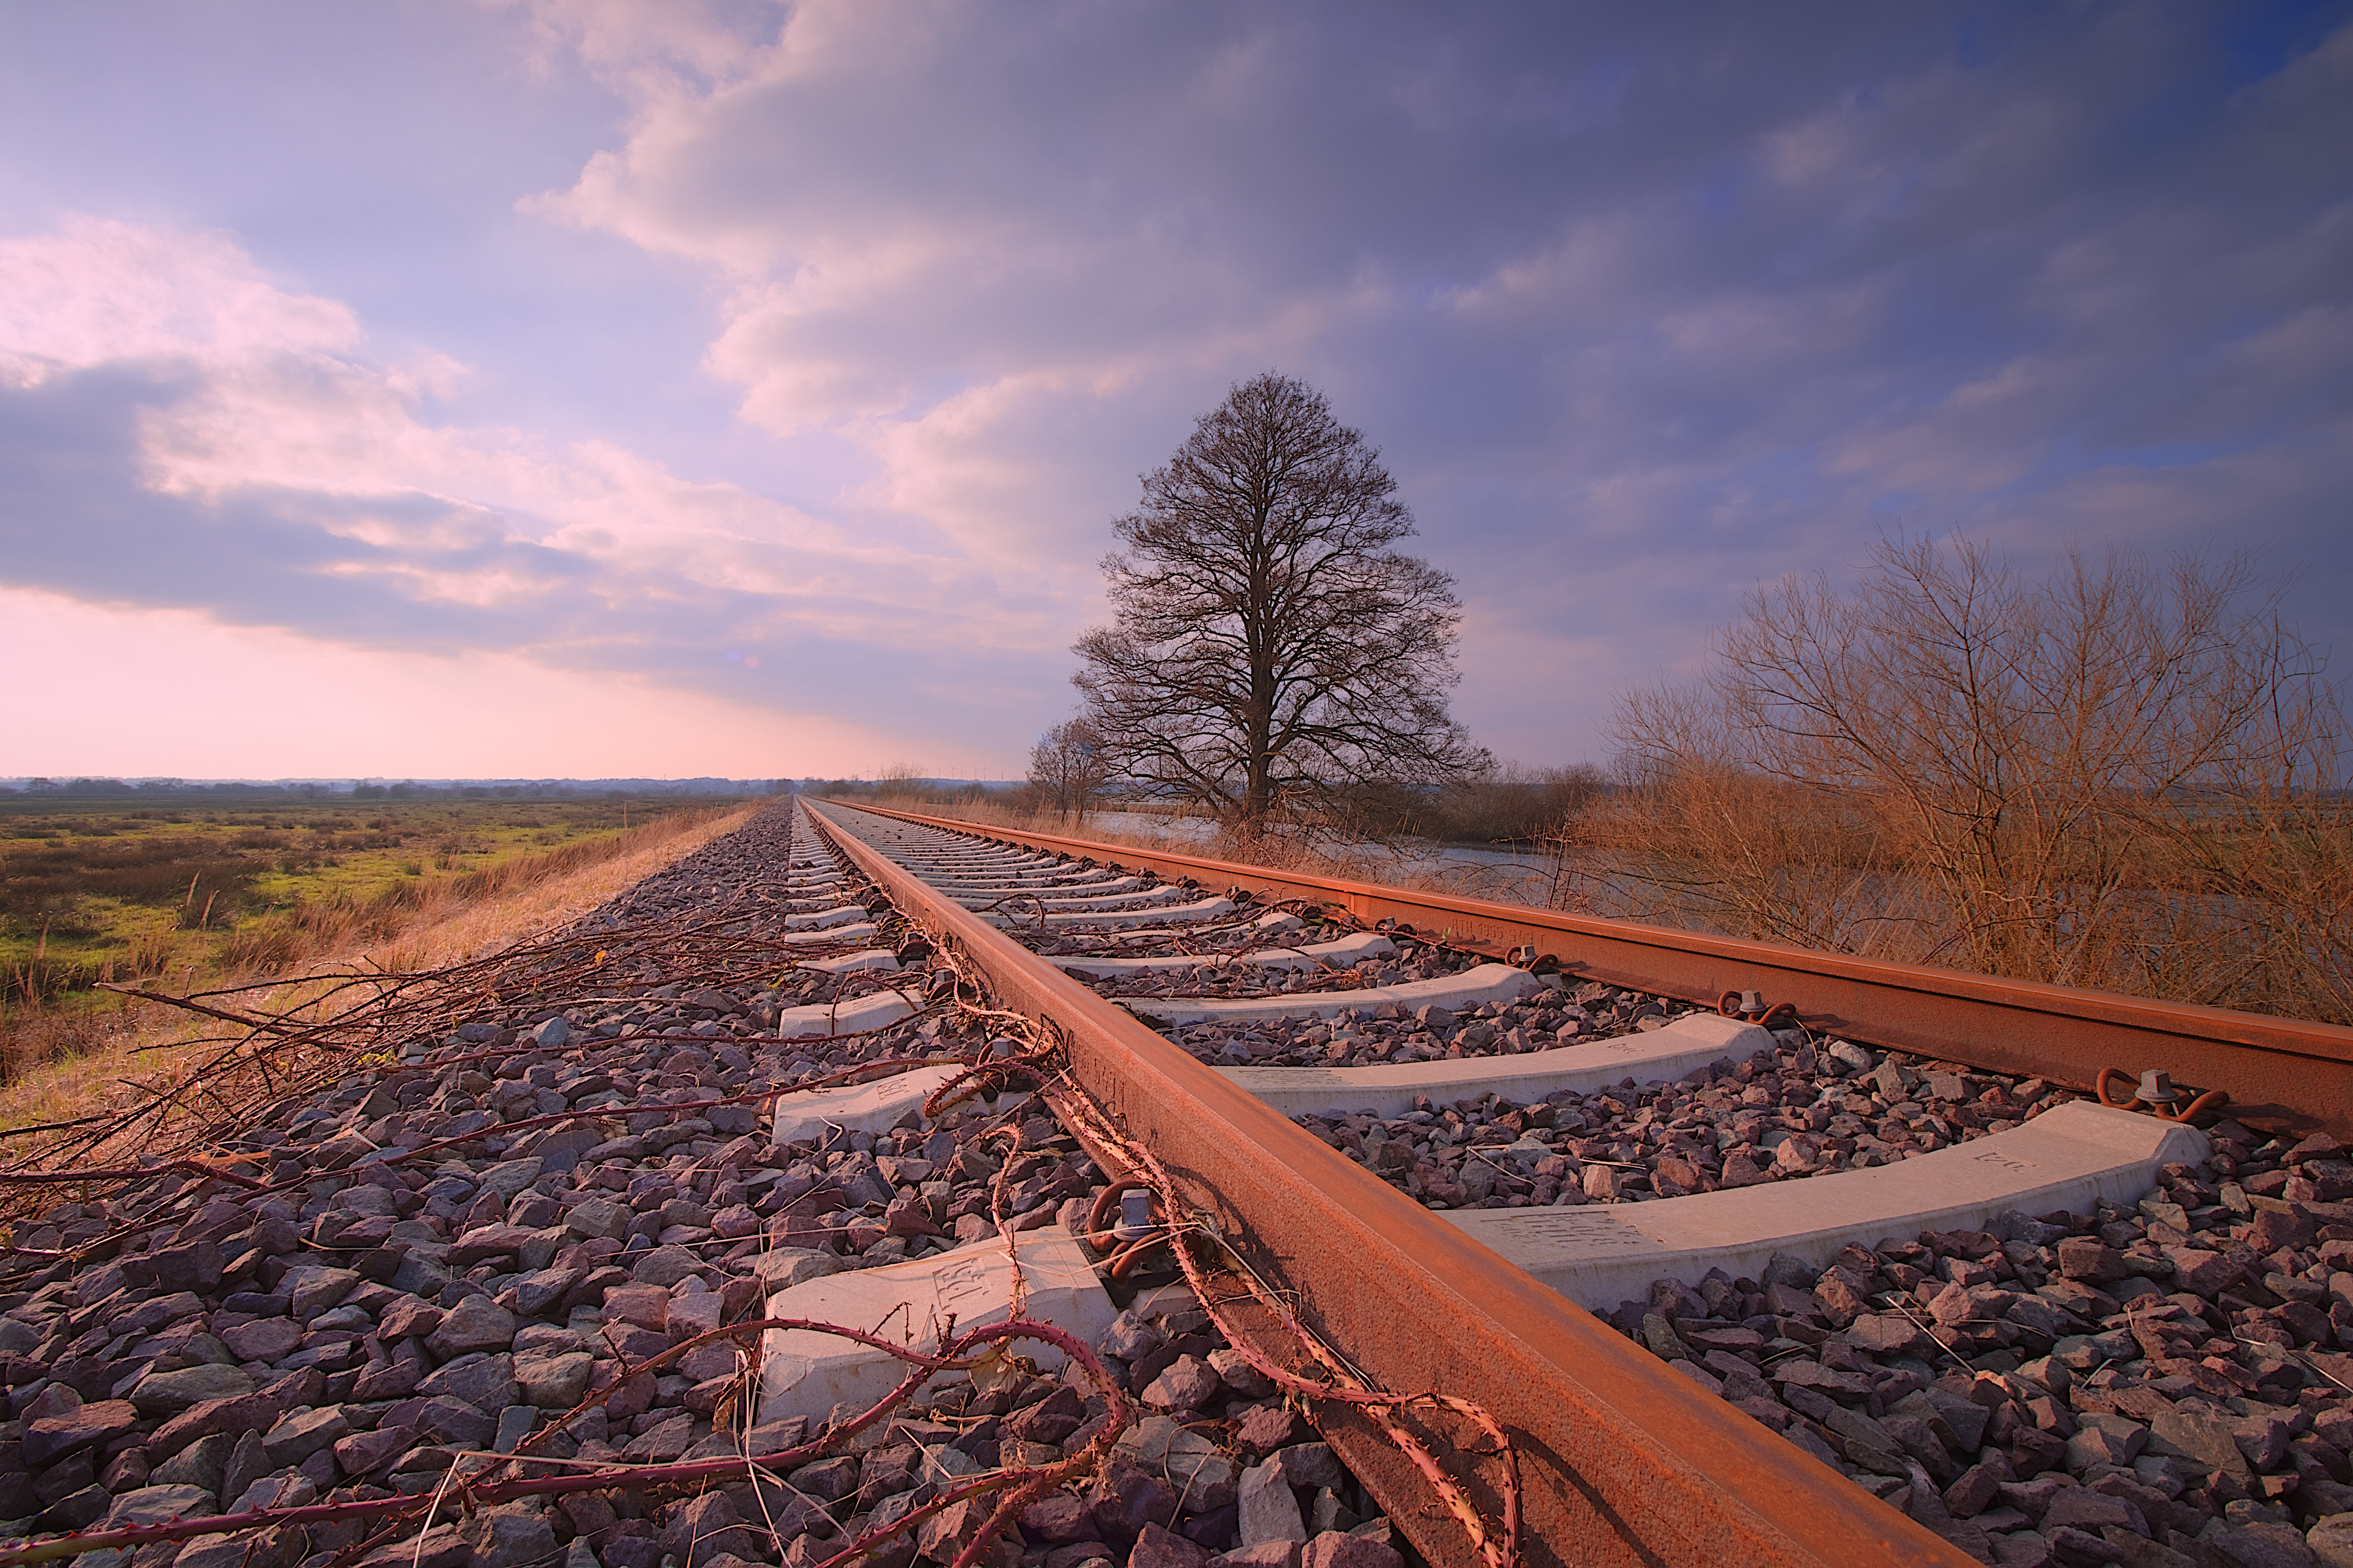 a train tracks with a tree in the distance